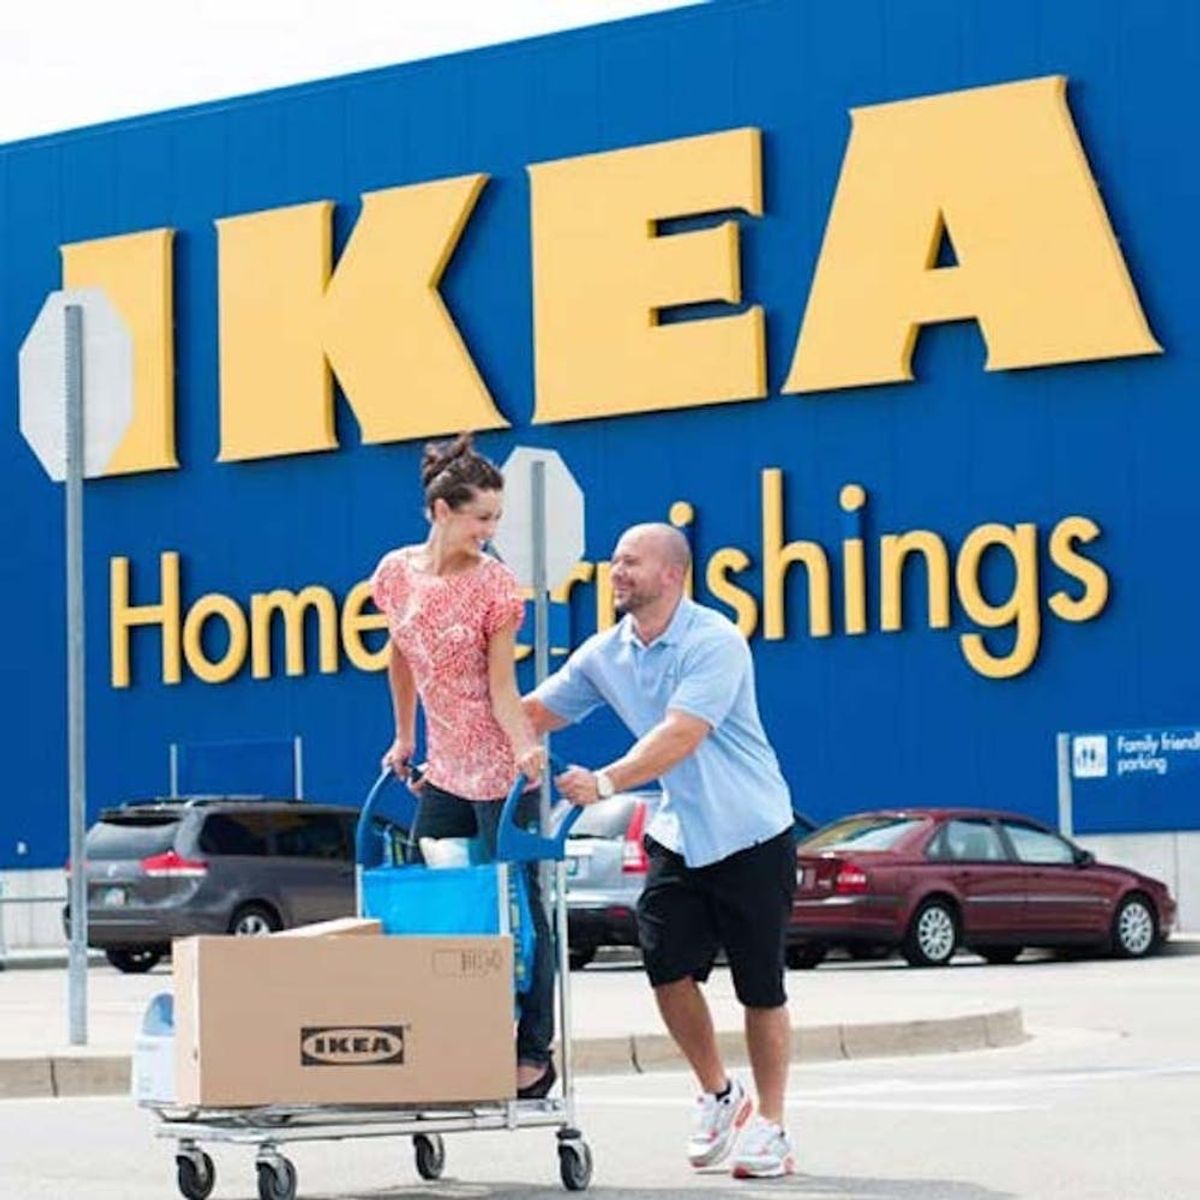 Get the Scoop on IKEA’s New Concept Stores